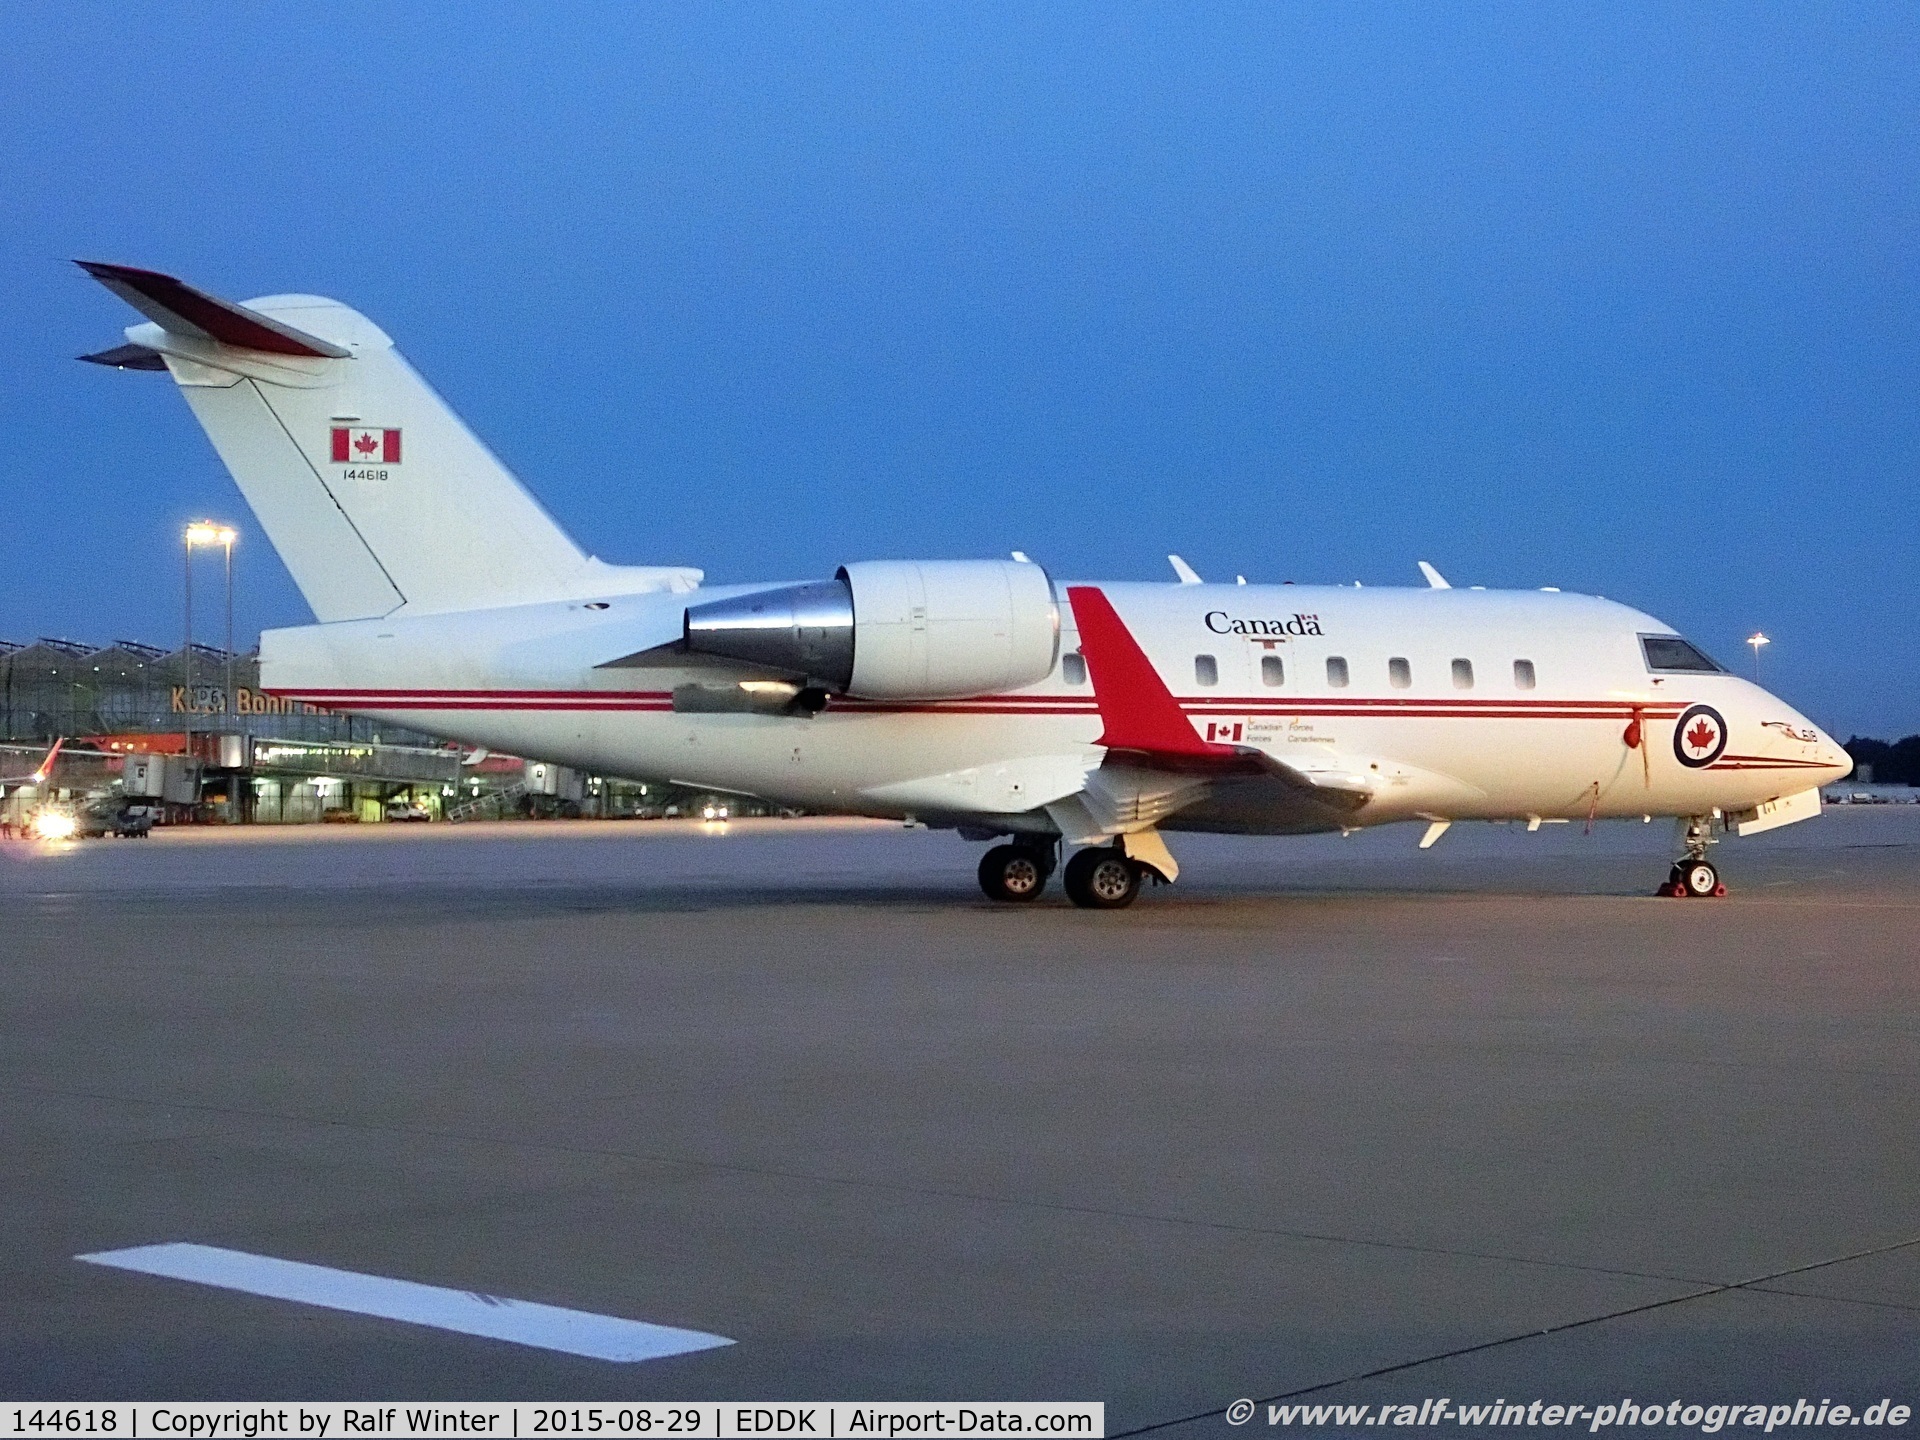 144618, 2002 Bombardier Challenger 604 (CL-600-2B16) C/N 5535, Bombardier CL-600-2B16 Challenger 604 - CFC Canadian Forces - 5535 - 144618 - 29.08.2015 - CGN